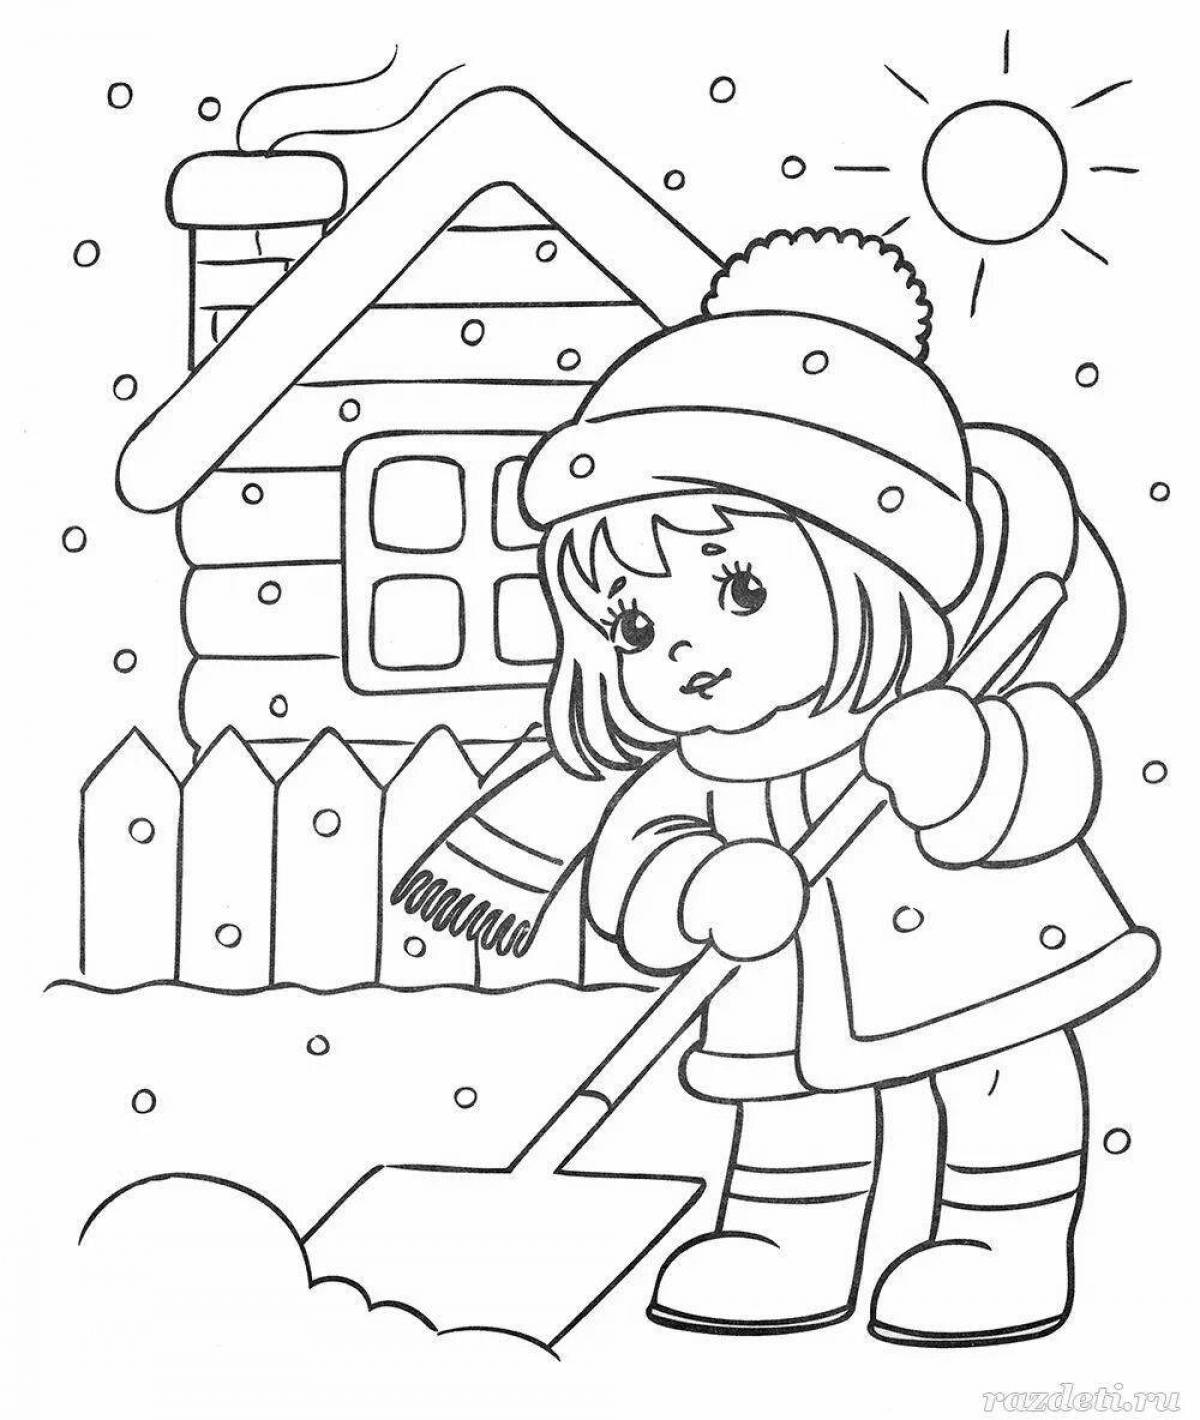 Playful winter coloring for kids